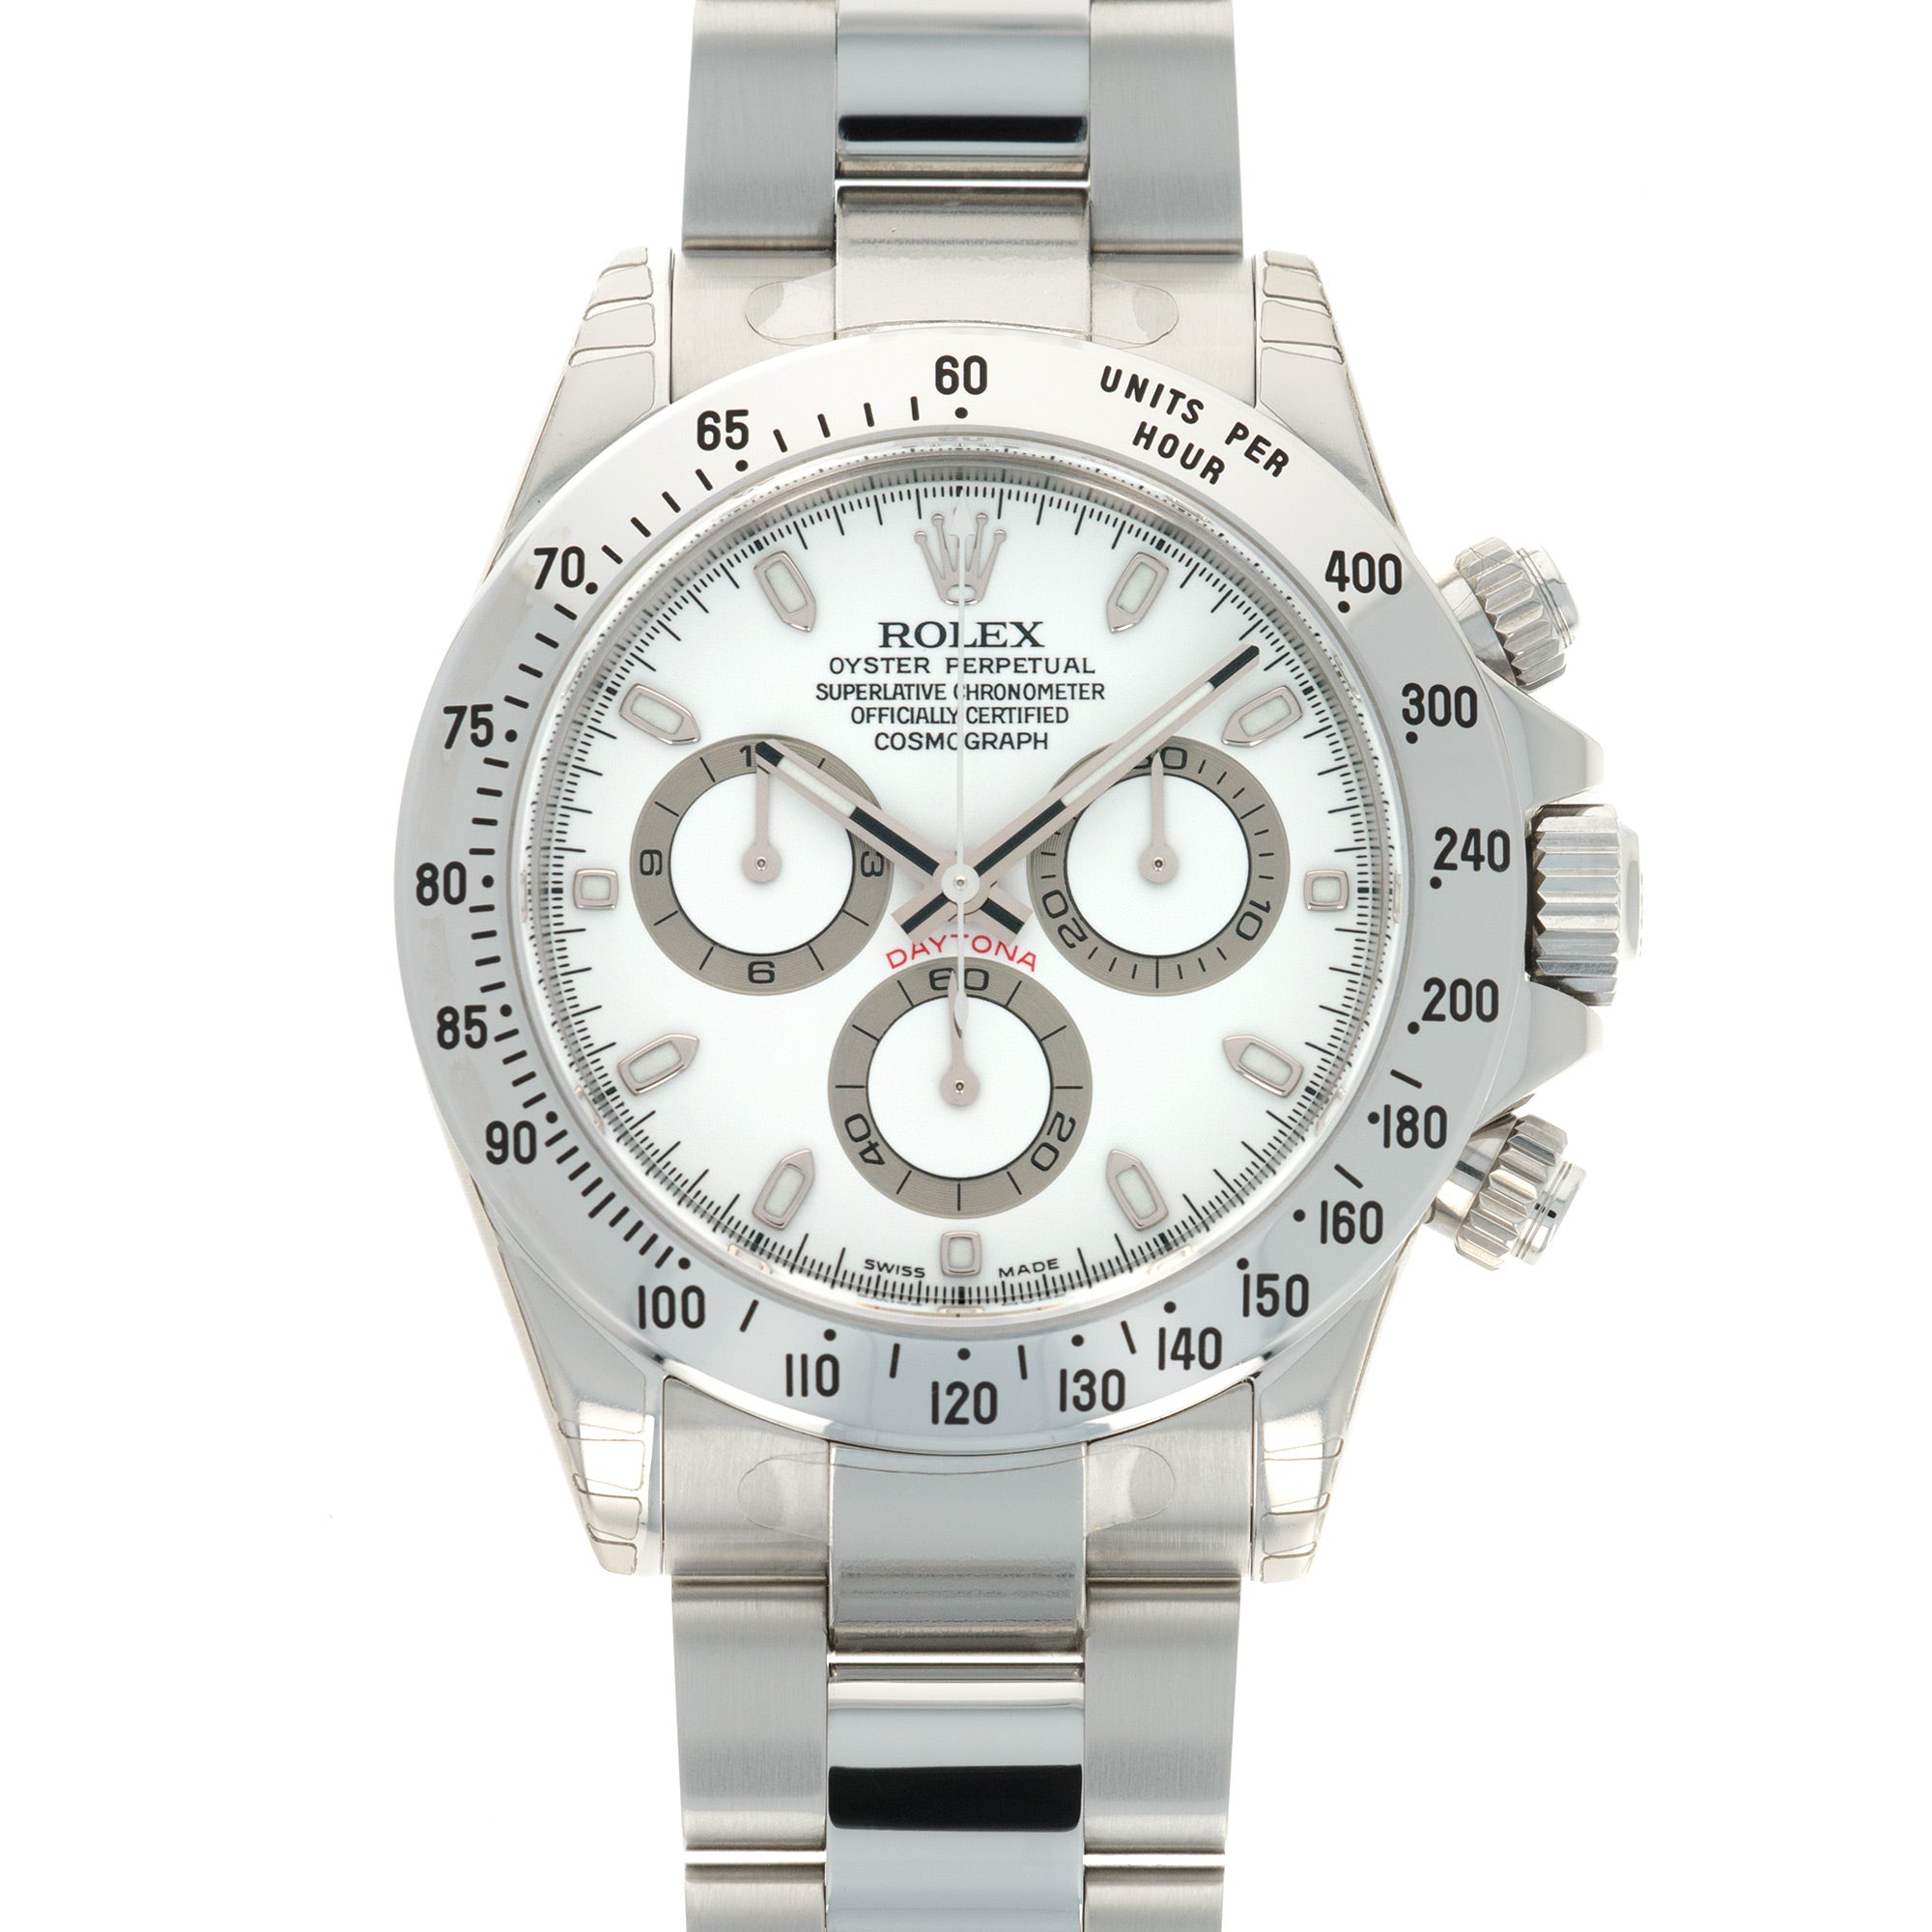 Rolex - Rolex Cosmograph Daytona Watch Ref. 116520, with Original Box and Papers, Completely New Old Stock - The Keystone Watches